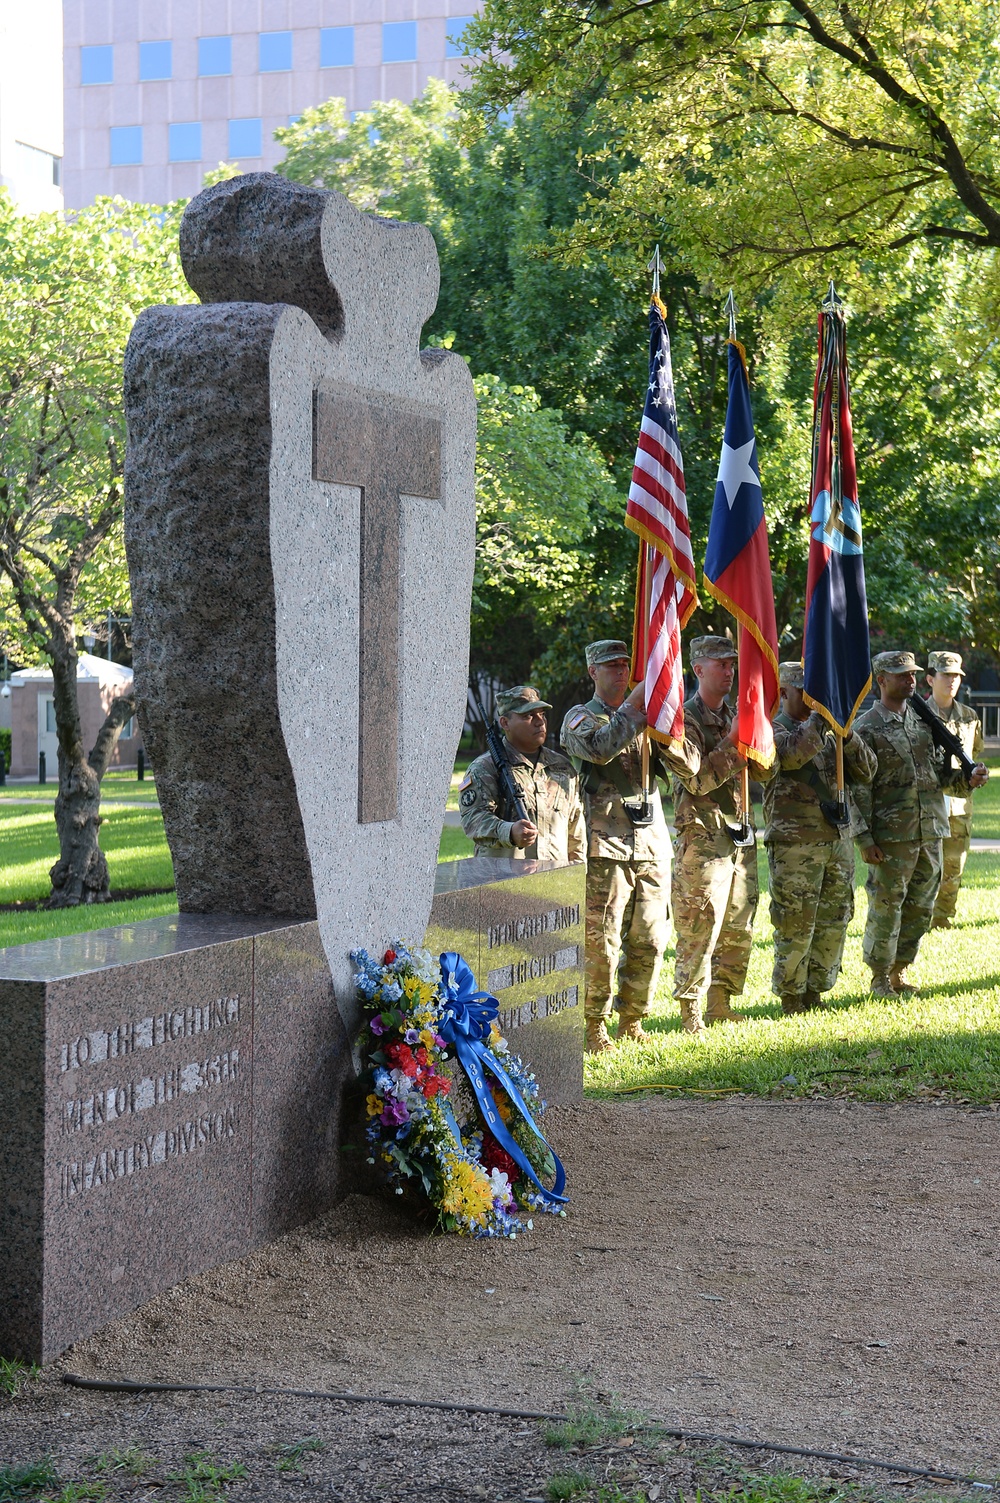 36th Infantry Division Celebrates 100th Anniversary